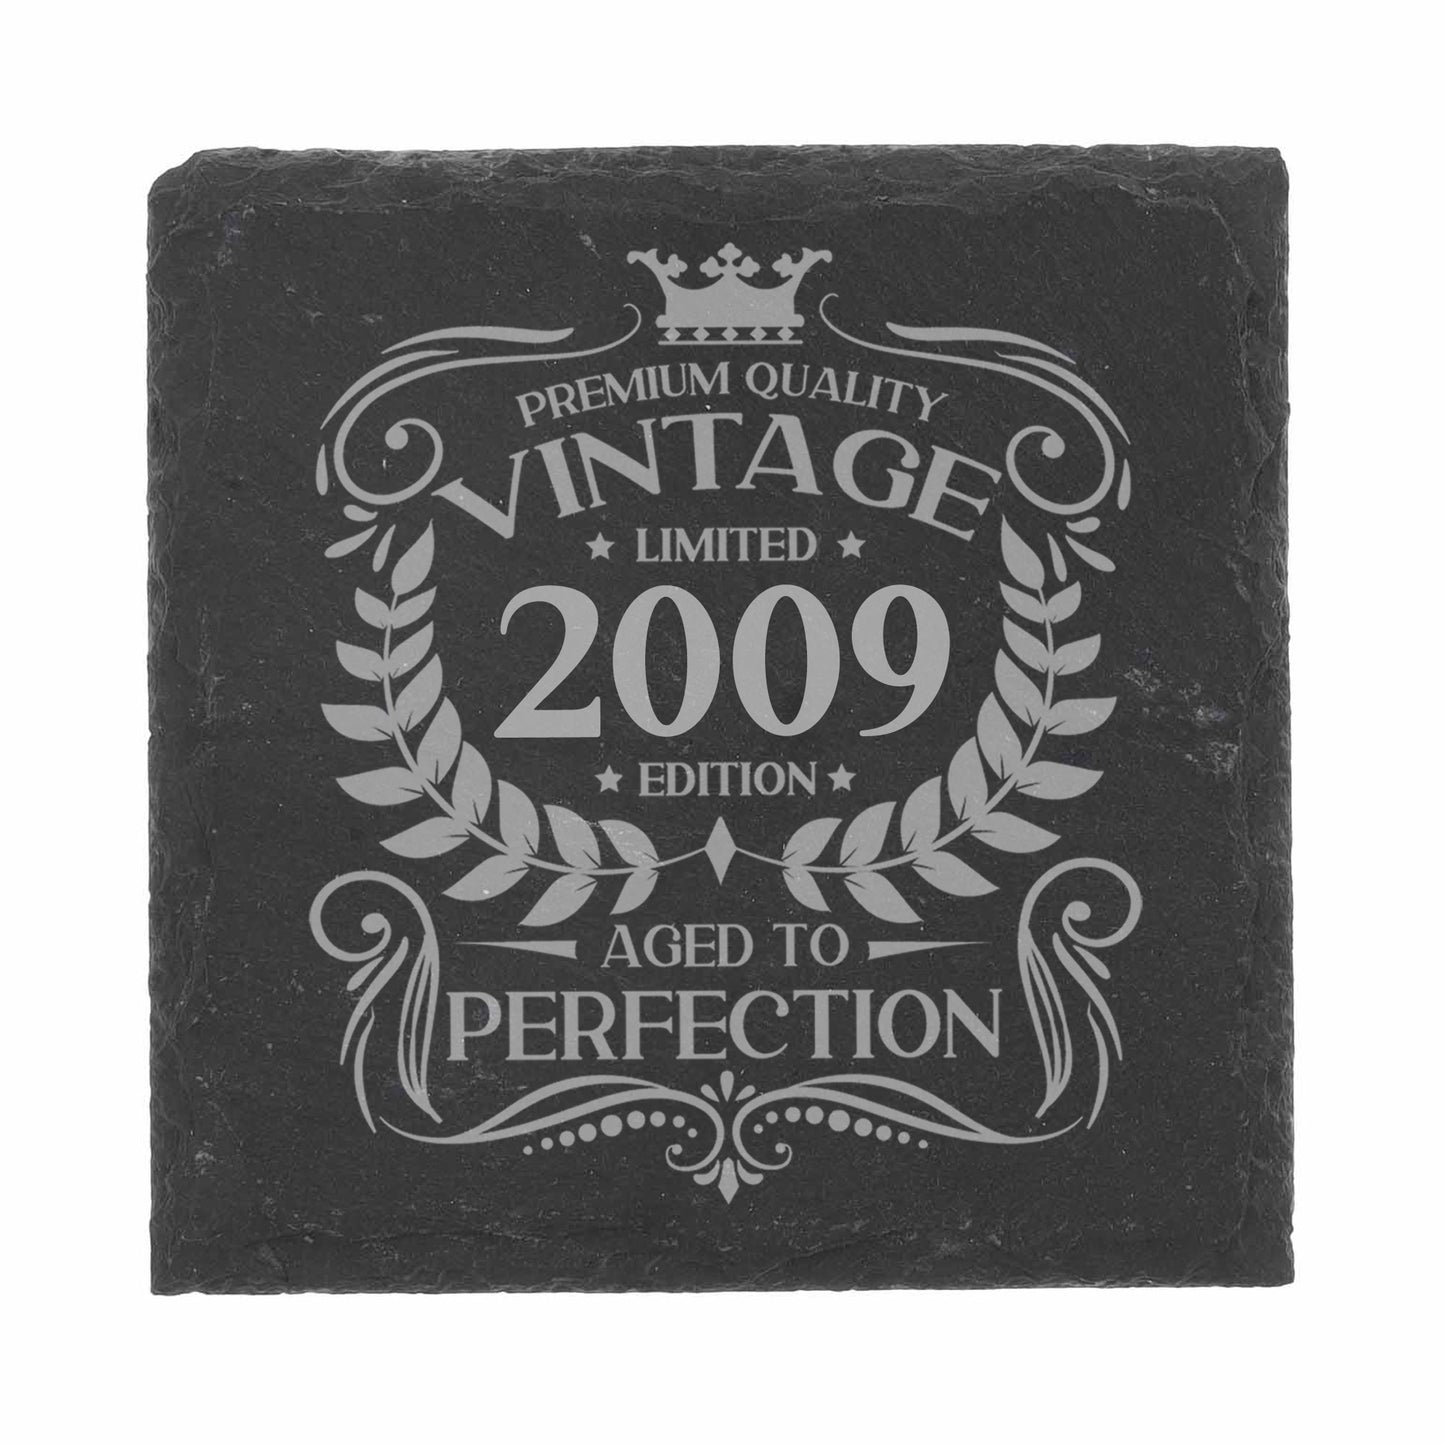 Personalised Vintage 2009 Mug and/or Coaster  - Always Looking Good - Square Coaster On Its Own  